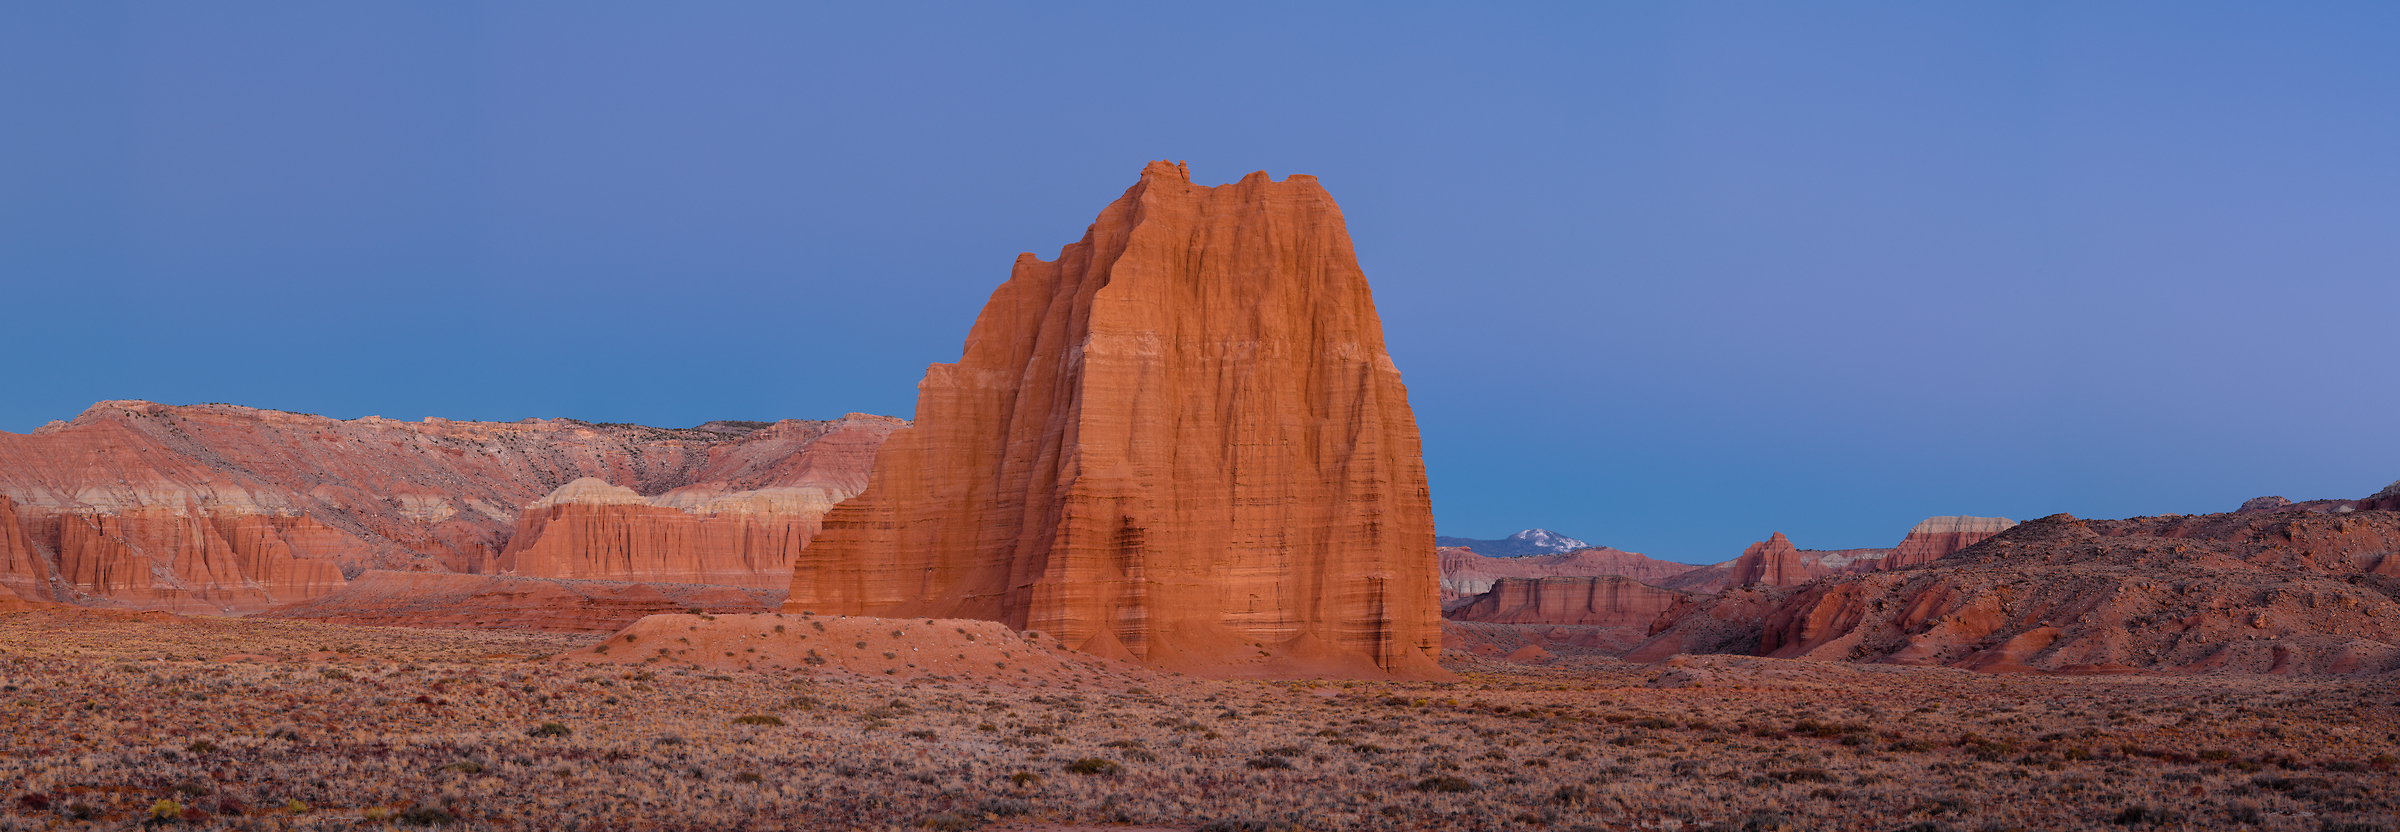 380 megapixels! A very high resolution, large-format VAST photo print of Temple of the Sun in Capitol Reef National Park; landscape photograph created by Greg Probst in Capitol Reef National Park, Utah.